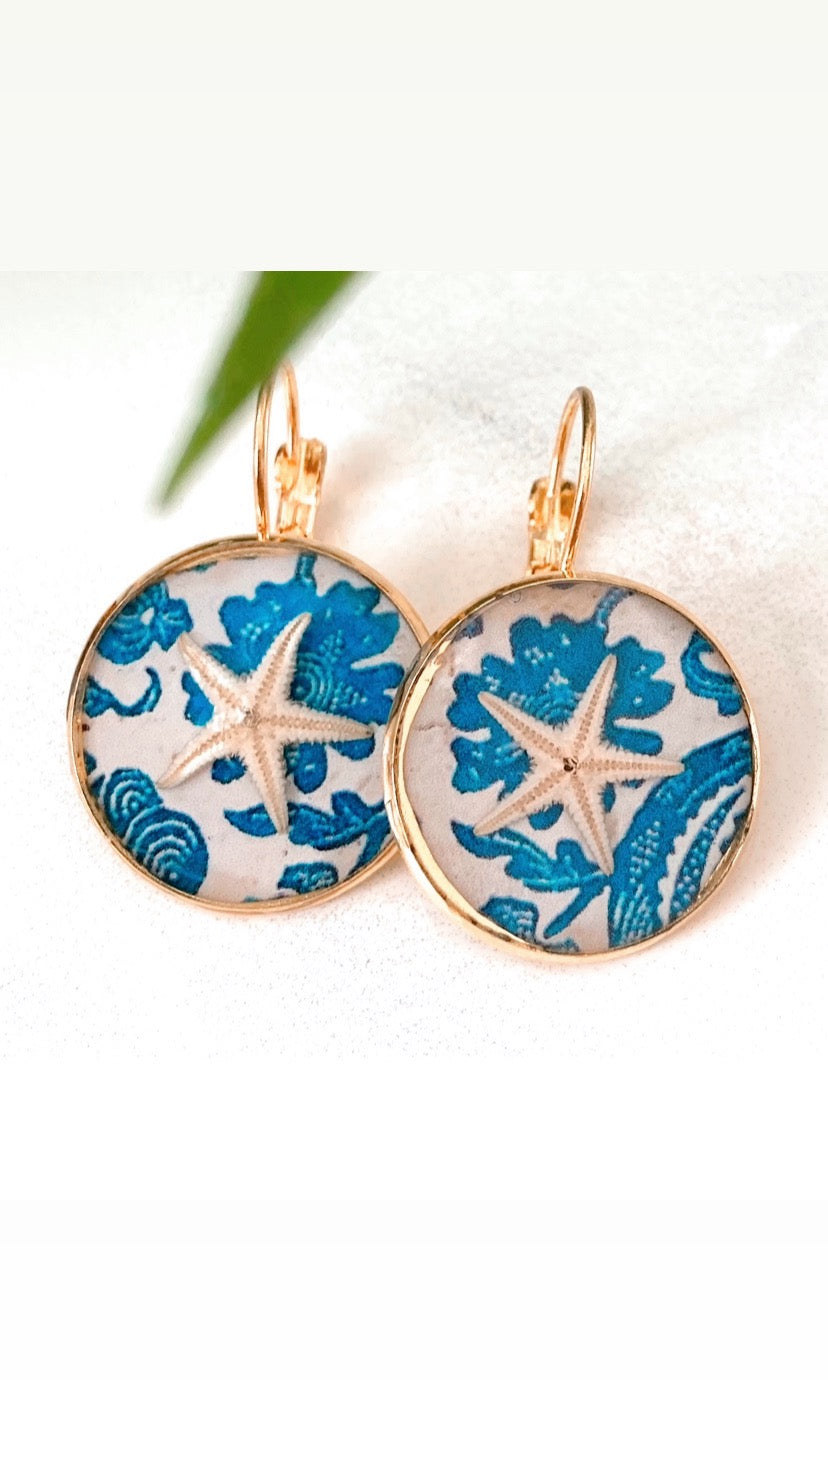 Blue Floral Starfish Earrings